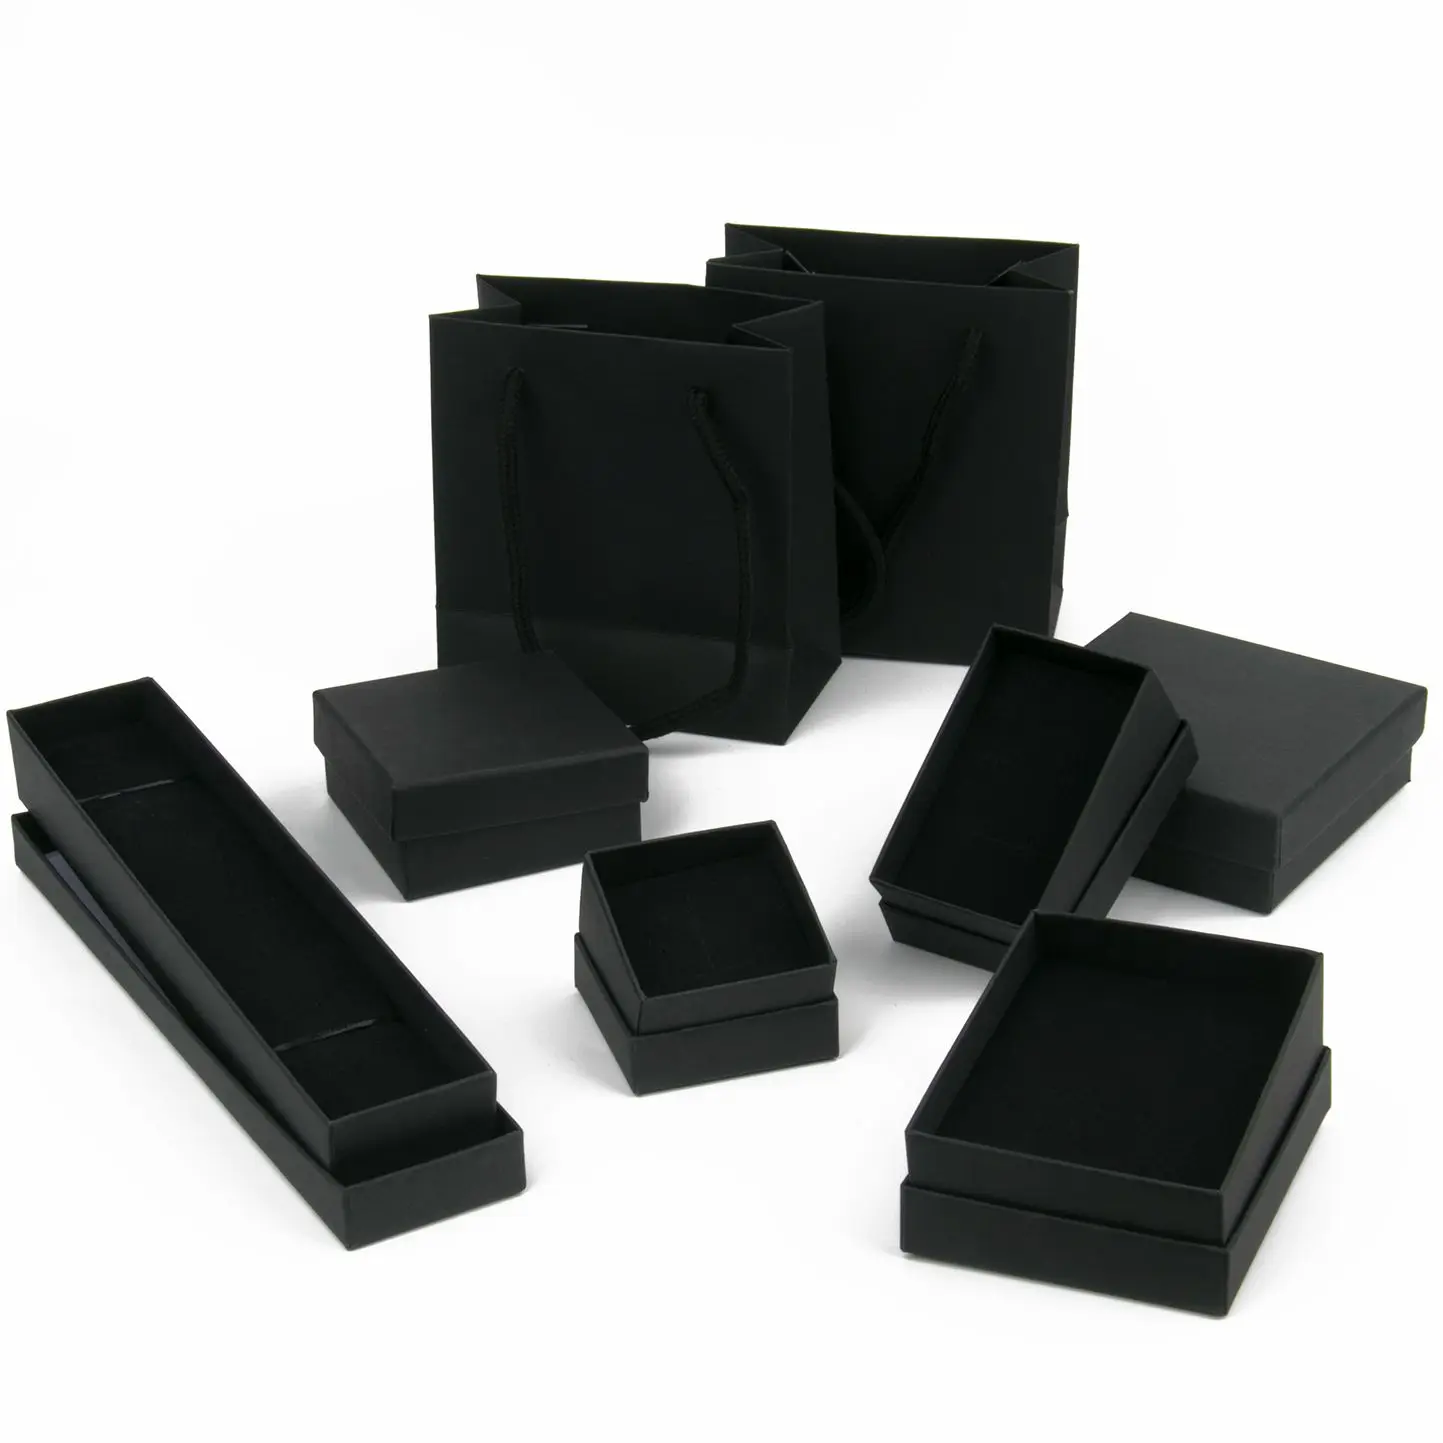 1PCS Black Square Jewelry Display Gifts Box Organizer Engagement for Ring Earring Brooch Necklace Bracelet Packaging Boxes